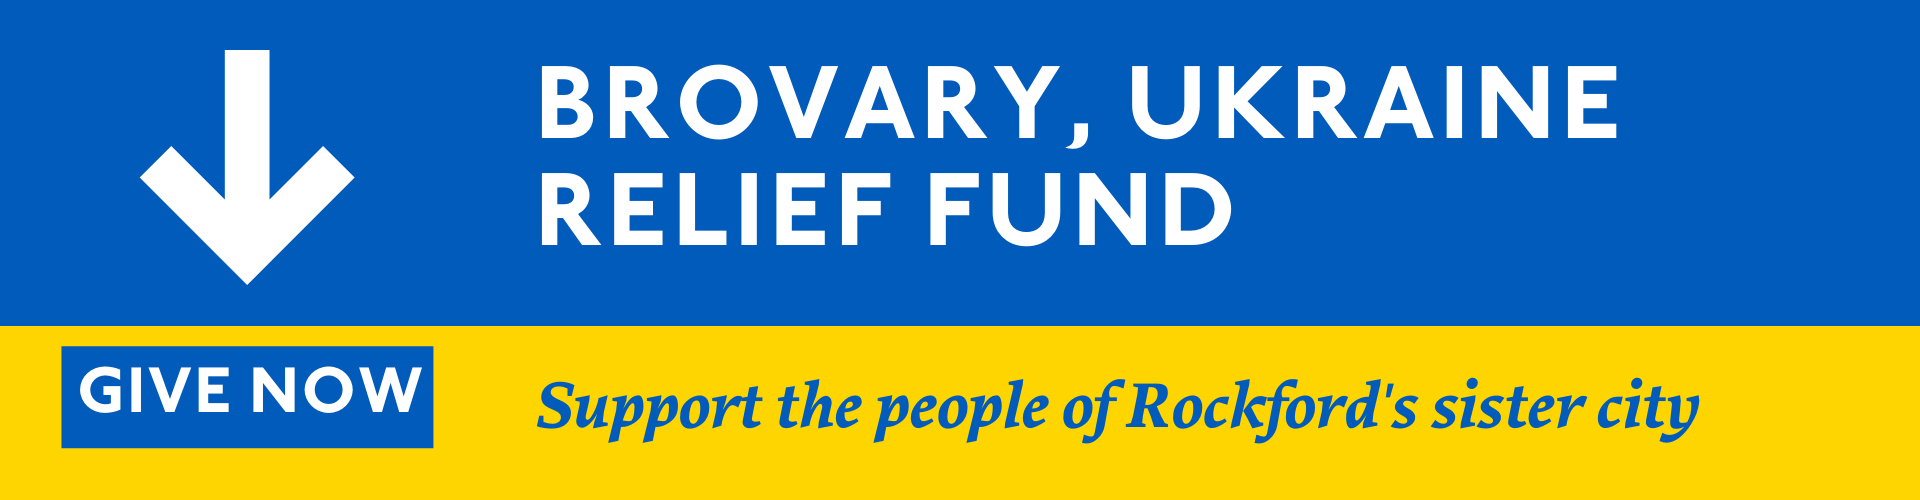 Background colors of blue and gold, symbolizing the Ukrainian flag. White arrow points to the words GIVE NOW. Text reads: Brovary, Ukraine Relief Fund. Support the people of Rockford's sister city. 